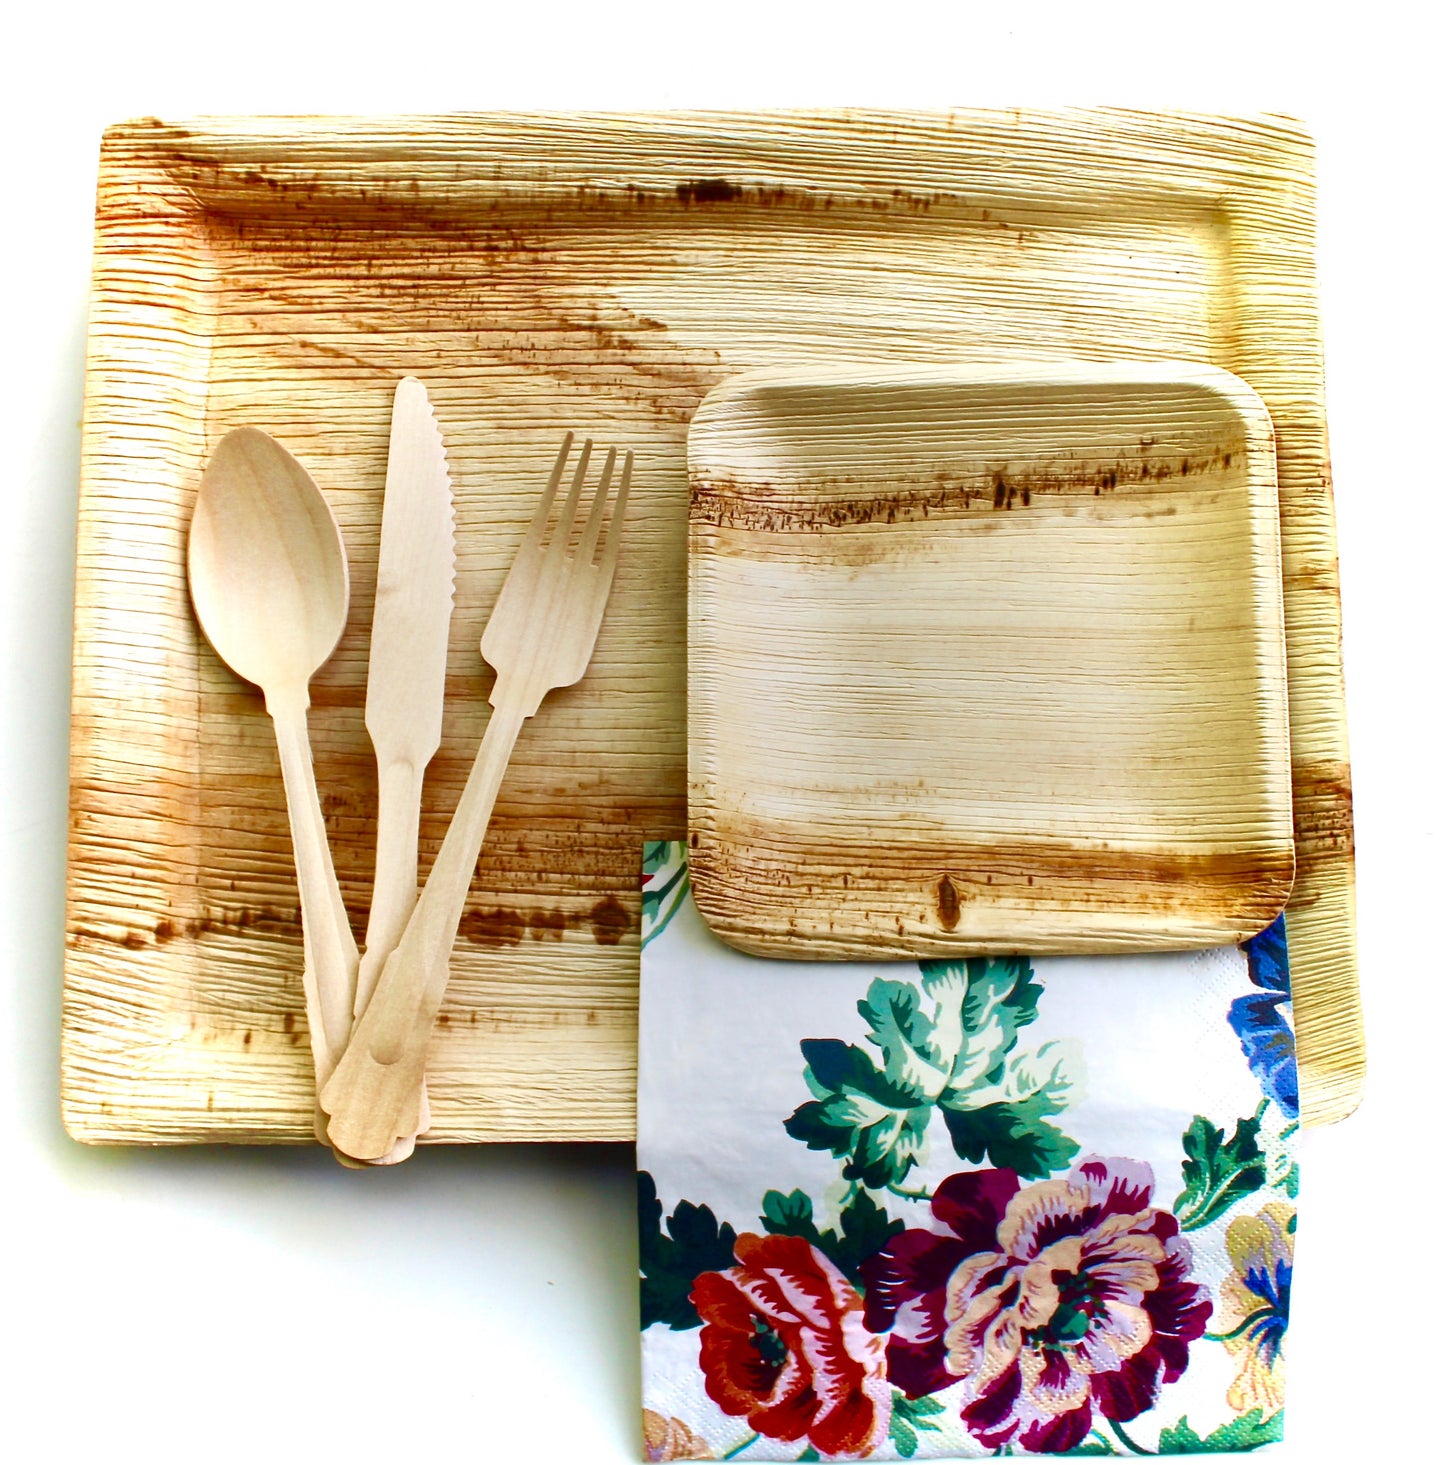 palm leaf plates 10 pice 6x9" try angle  deep   - 10 pic 5" Bowl - 10 pic Heart 6" -10 pic Coup - 20 pic Napkin     30  pic cutler - 50 pic napkin